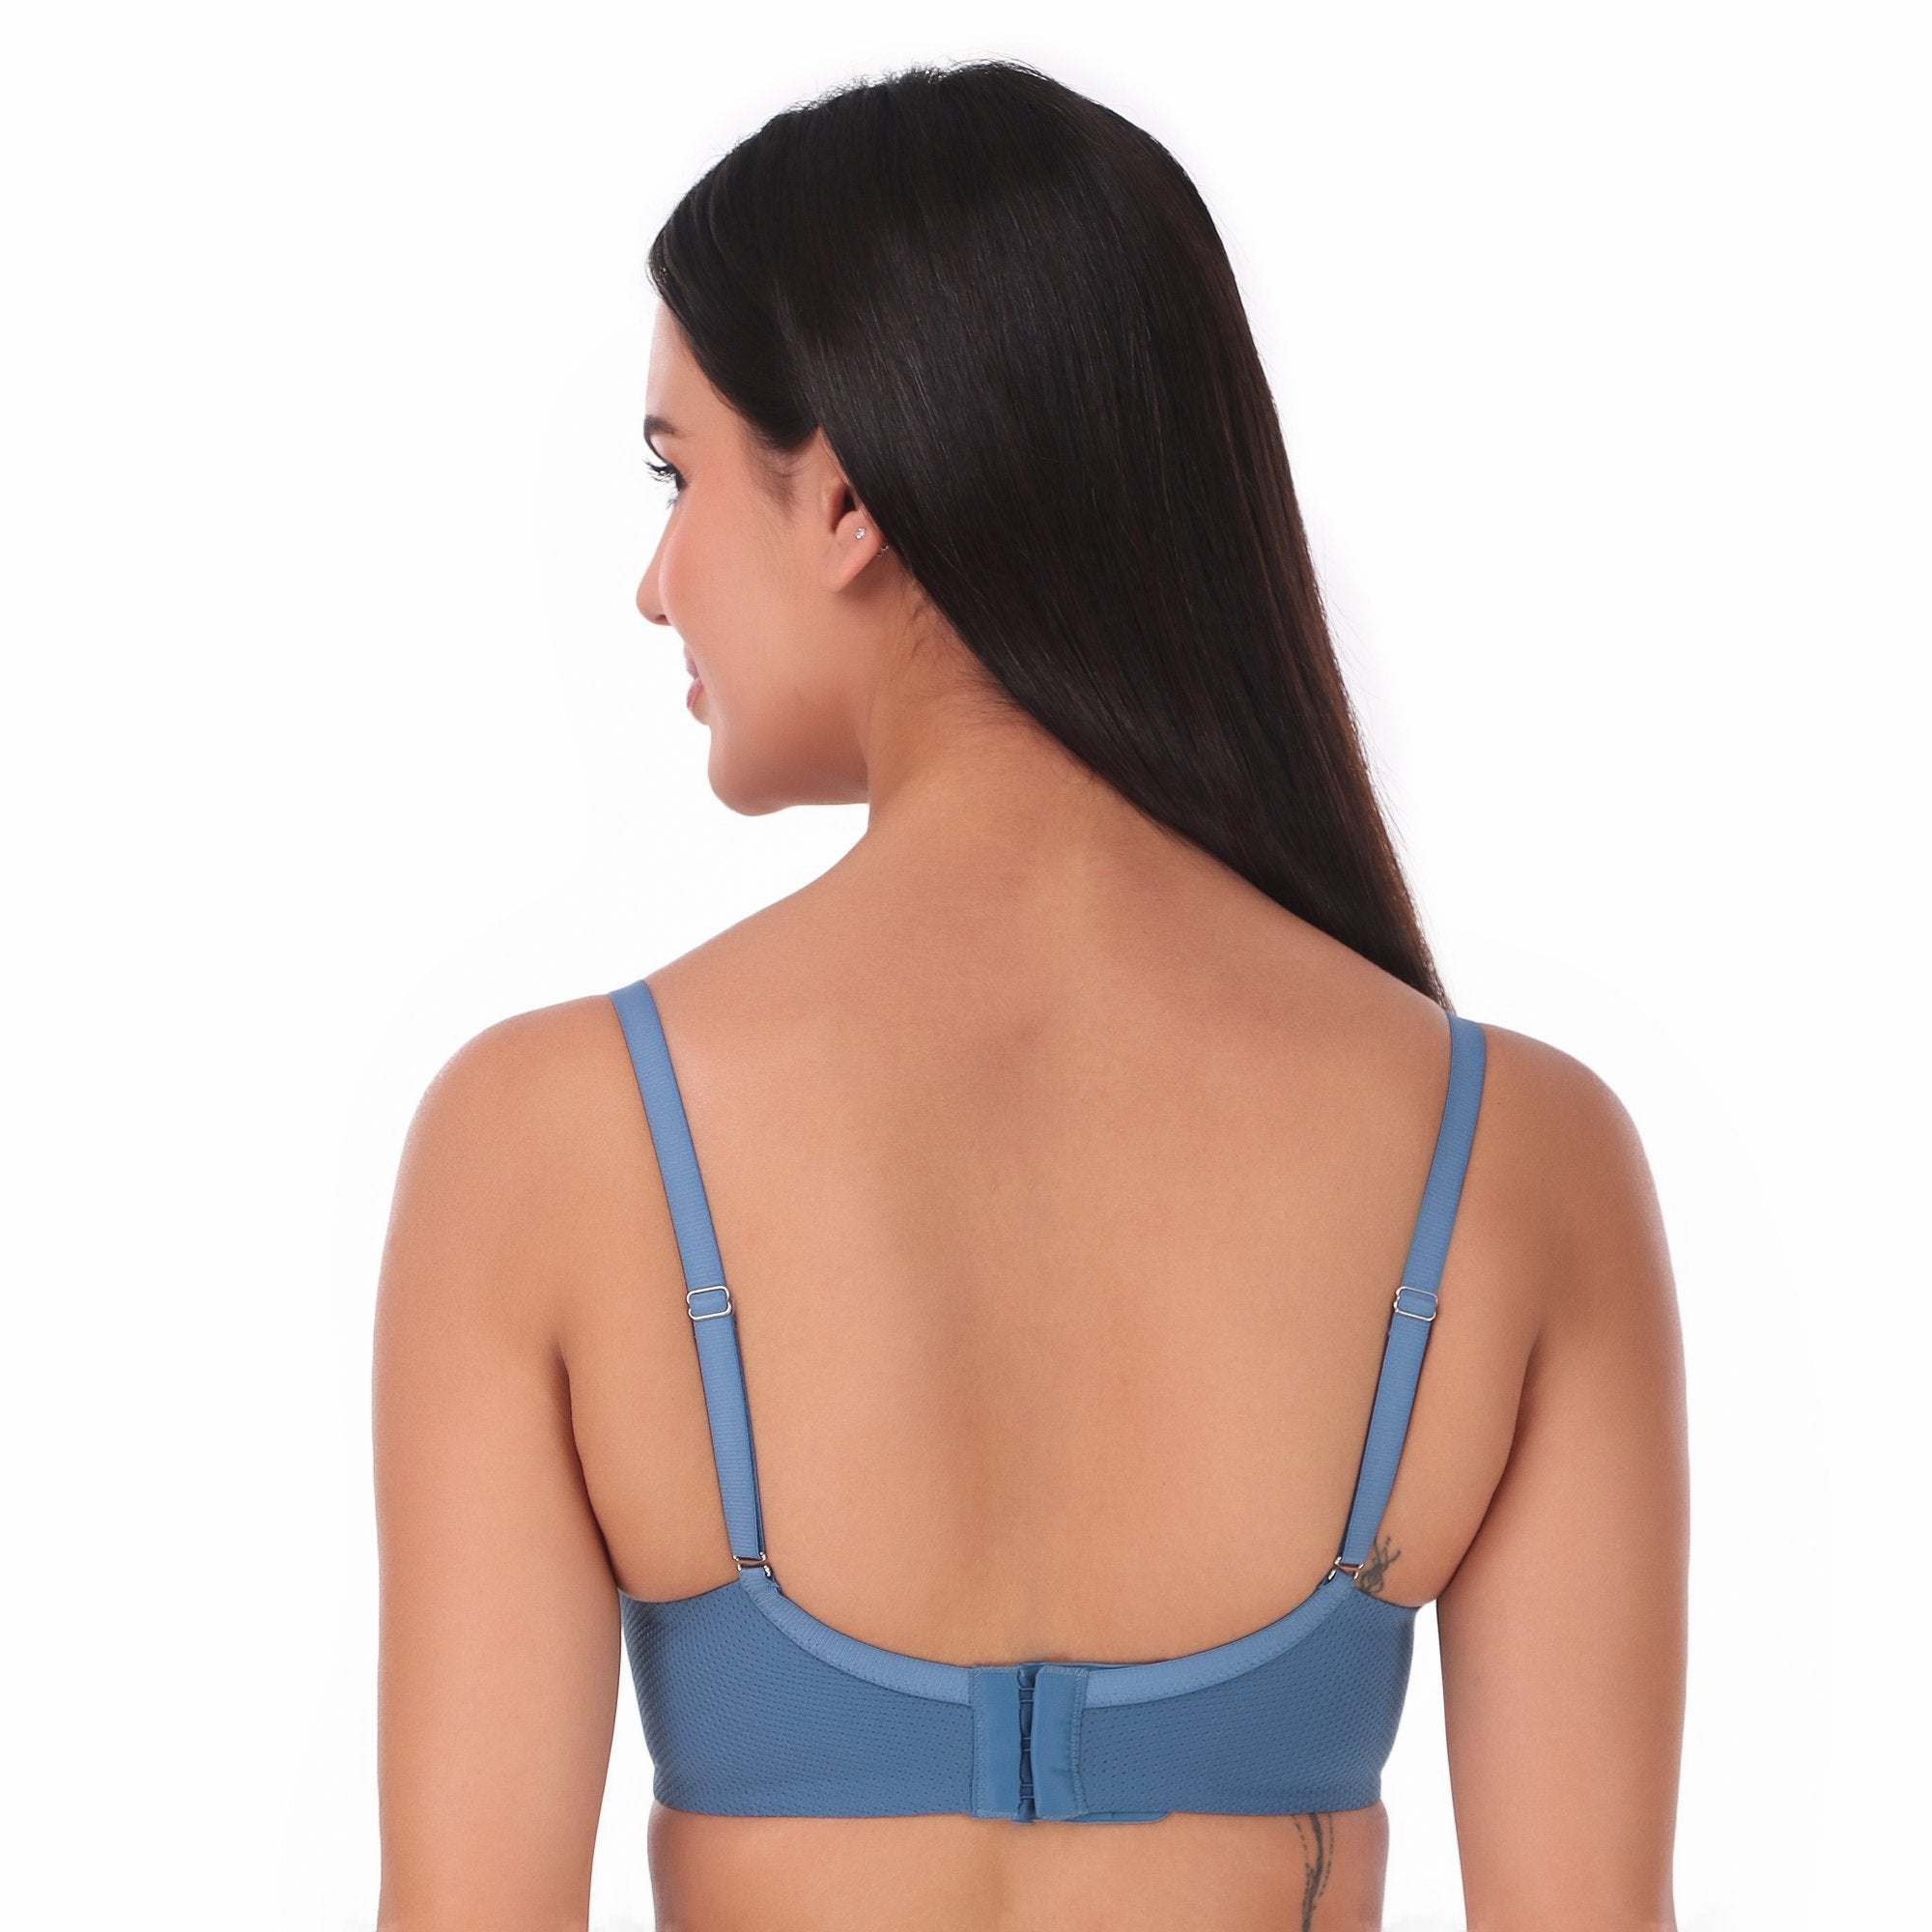 AMANTE-BRA75601 Stay Cool - Padded Non-Wired Cooling Bra